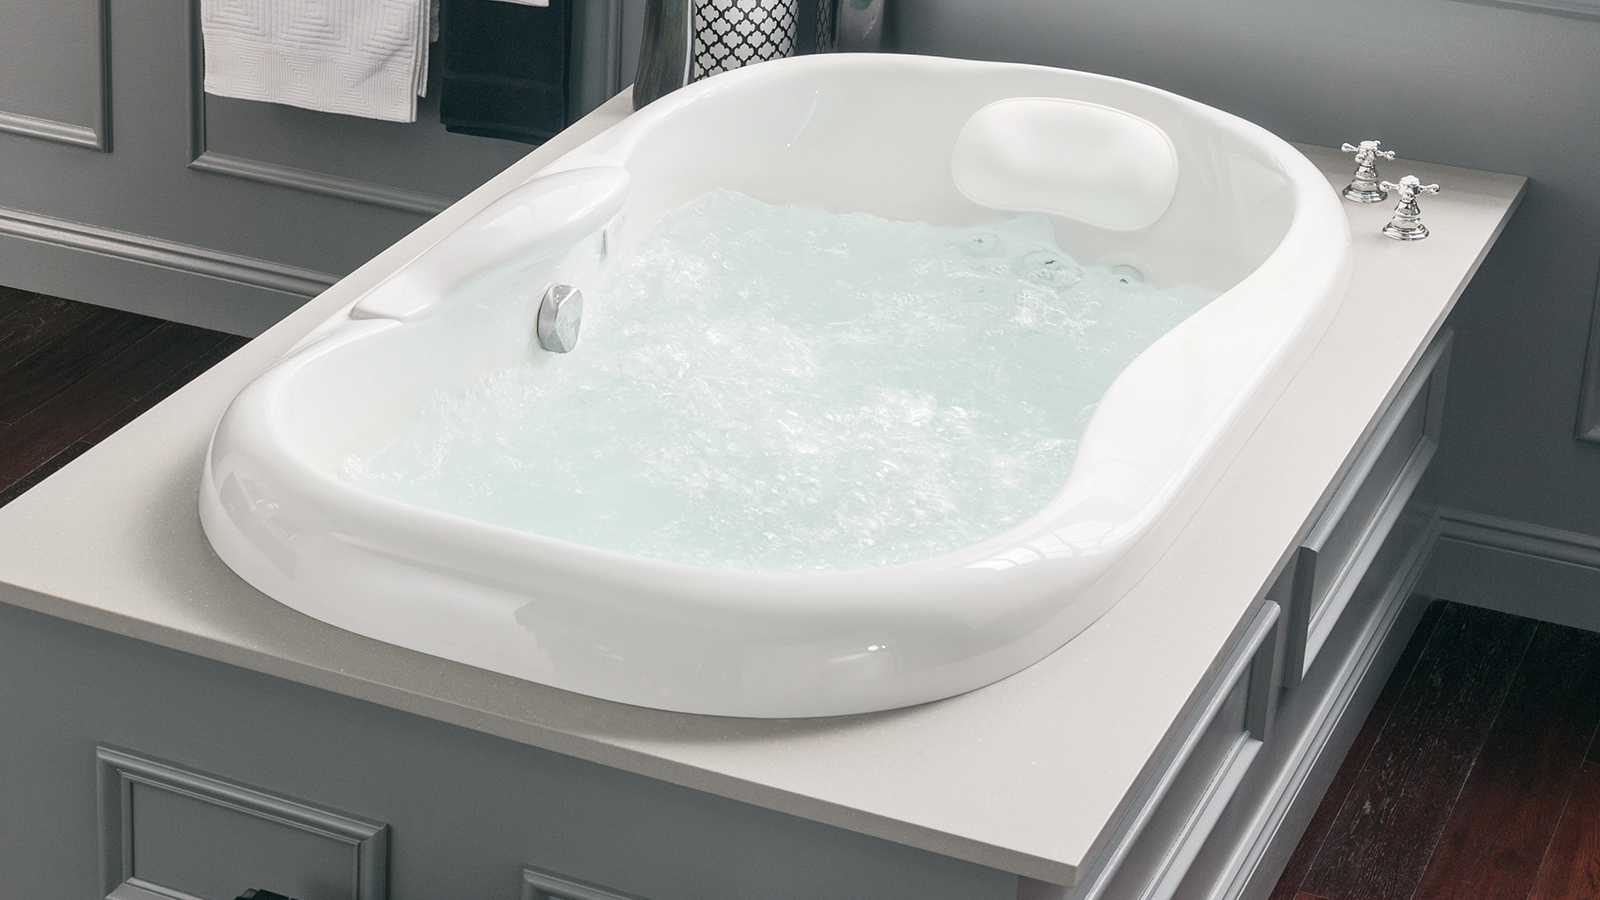 Video of the combo massage tub.